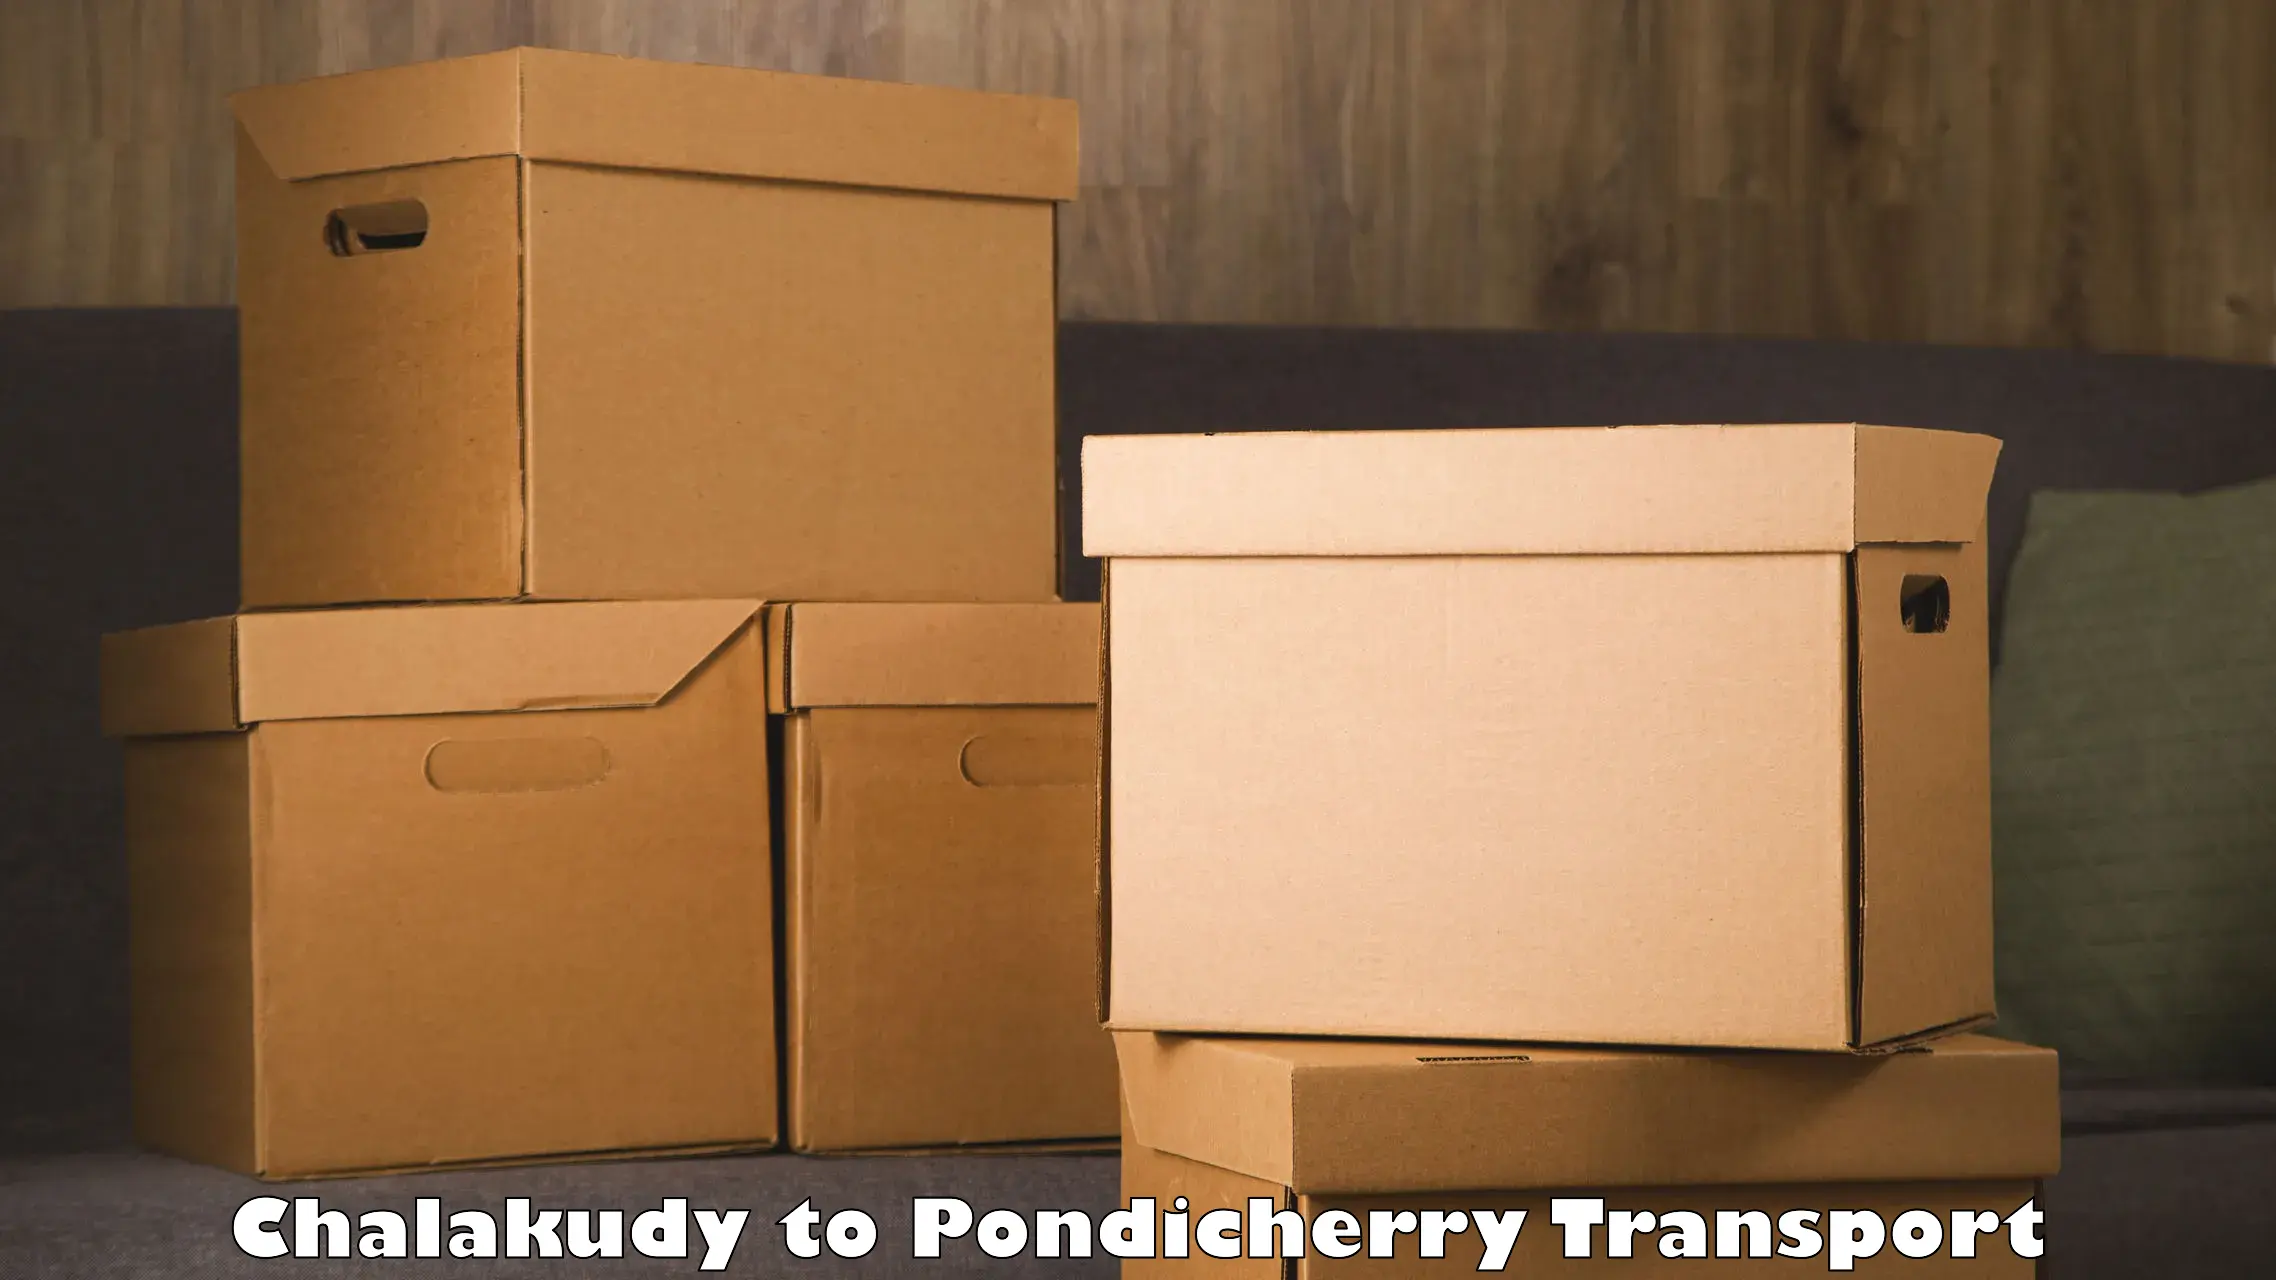 Truck transport companies in India Chalakudy to Pondicherry